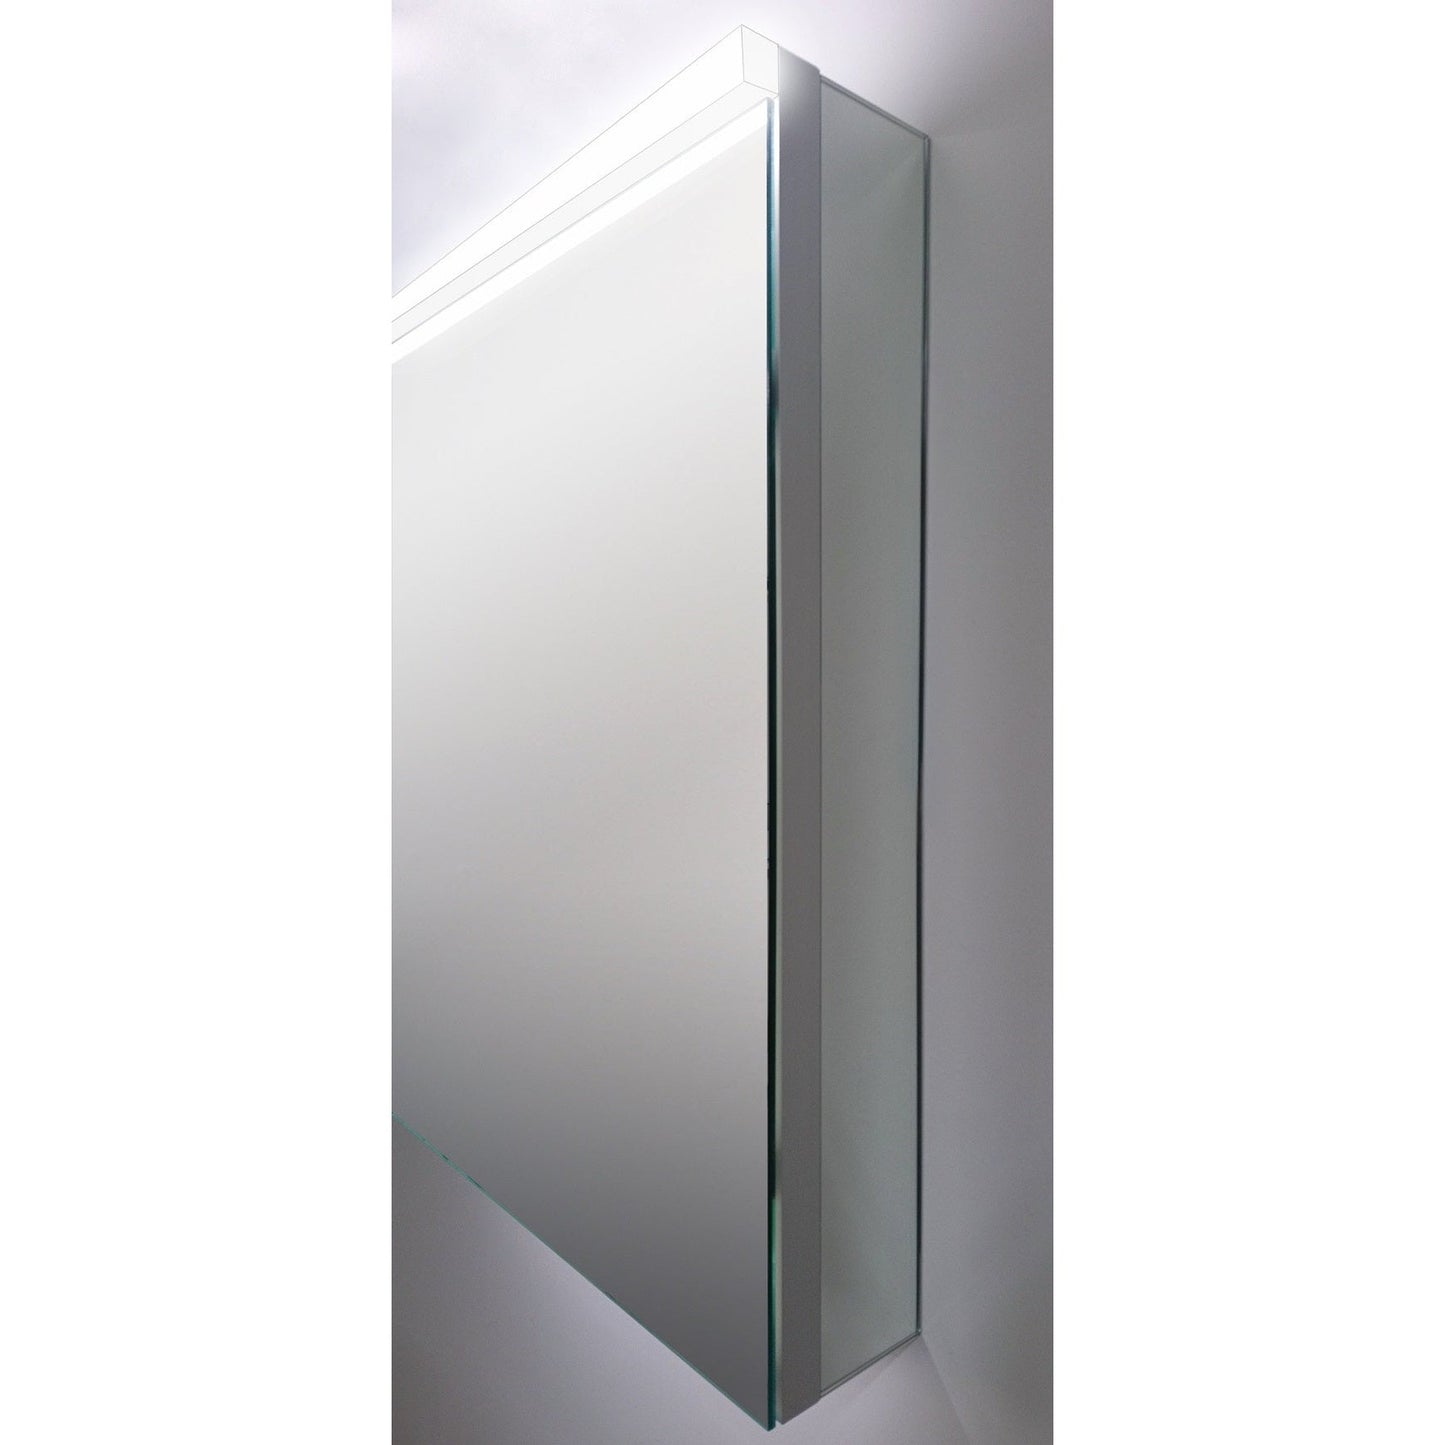 Sidler Xamo 48" x 30" 4000K Double Mirror Door Medicine Cabinet With Built-in GFCI outlet and Night Light Function